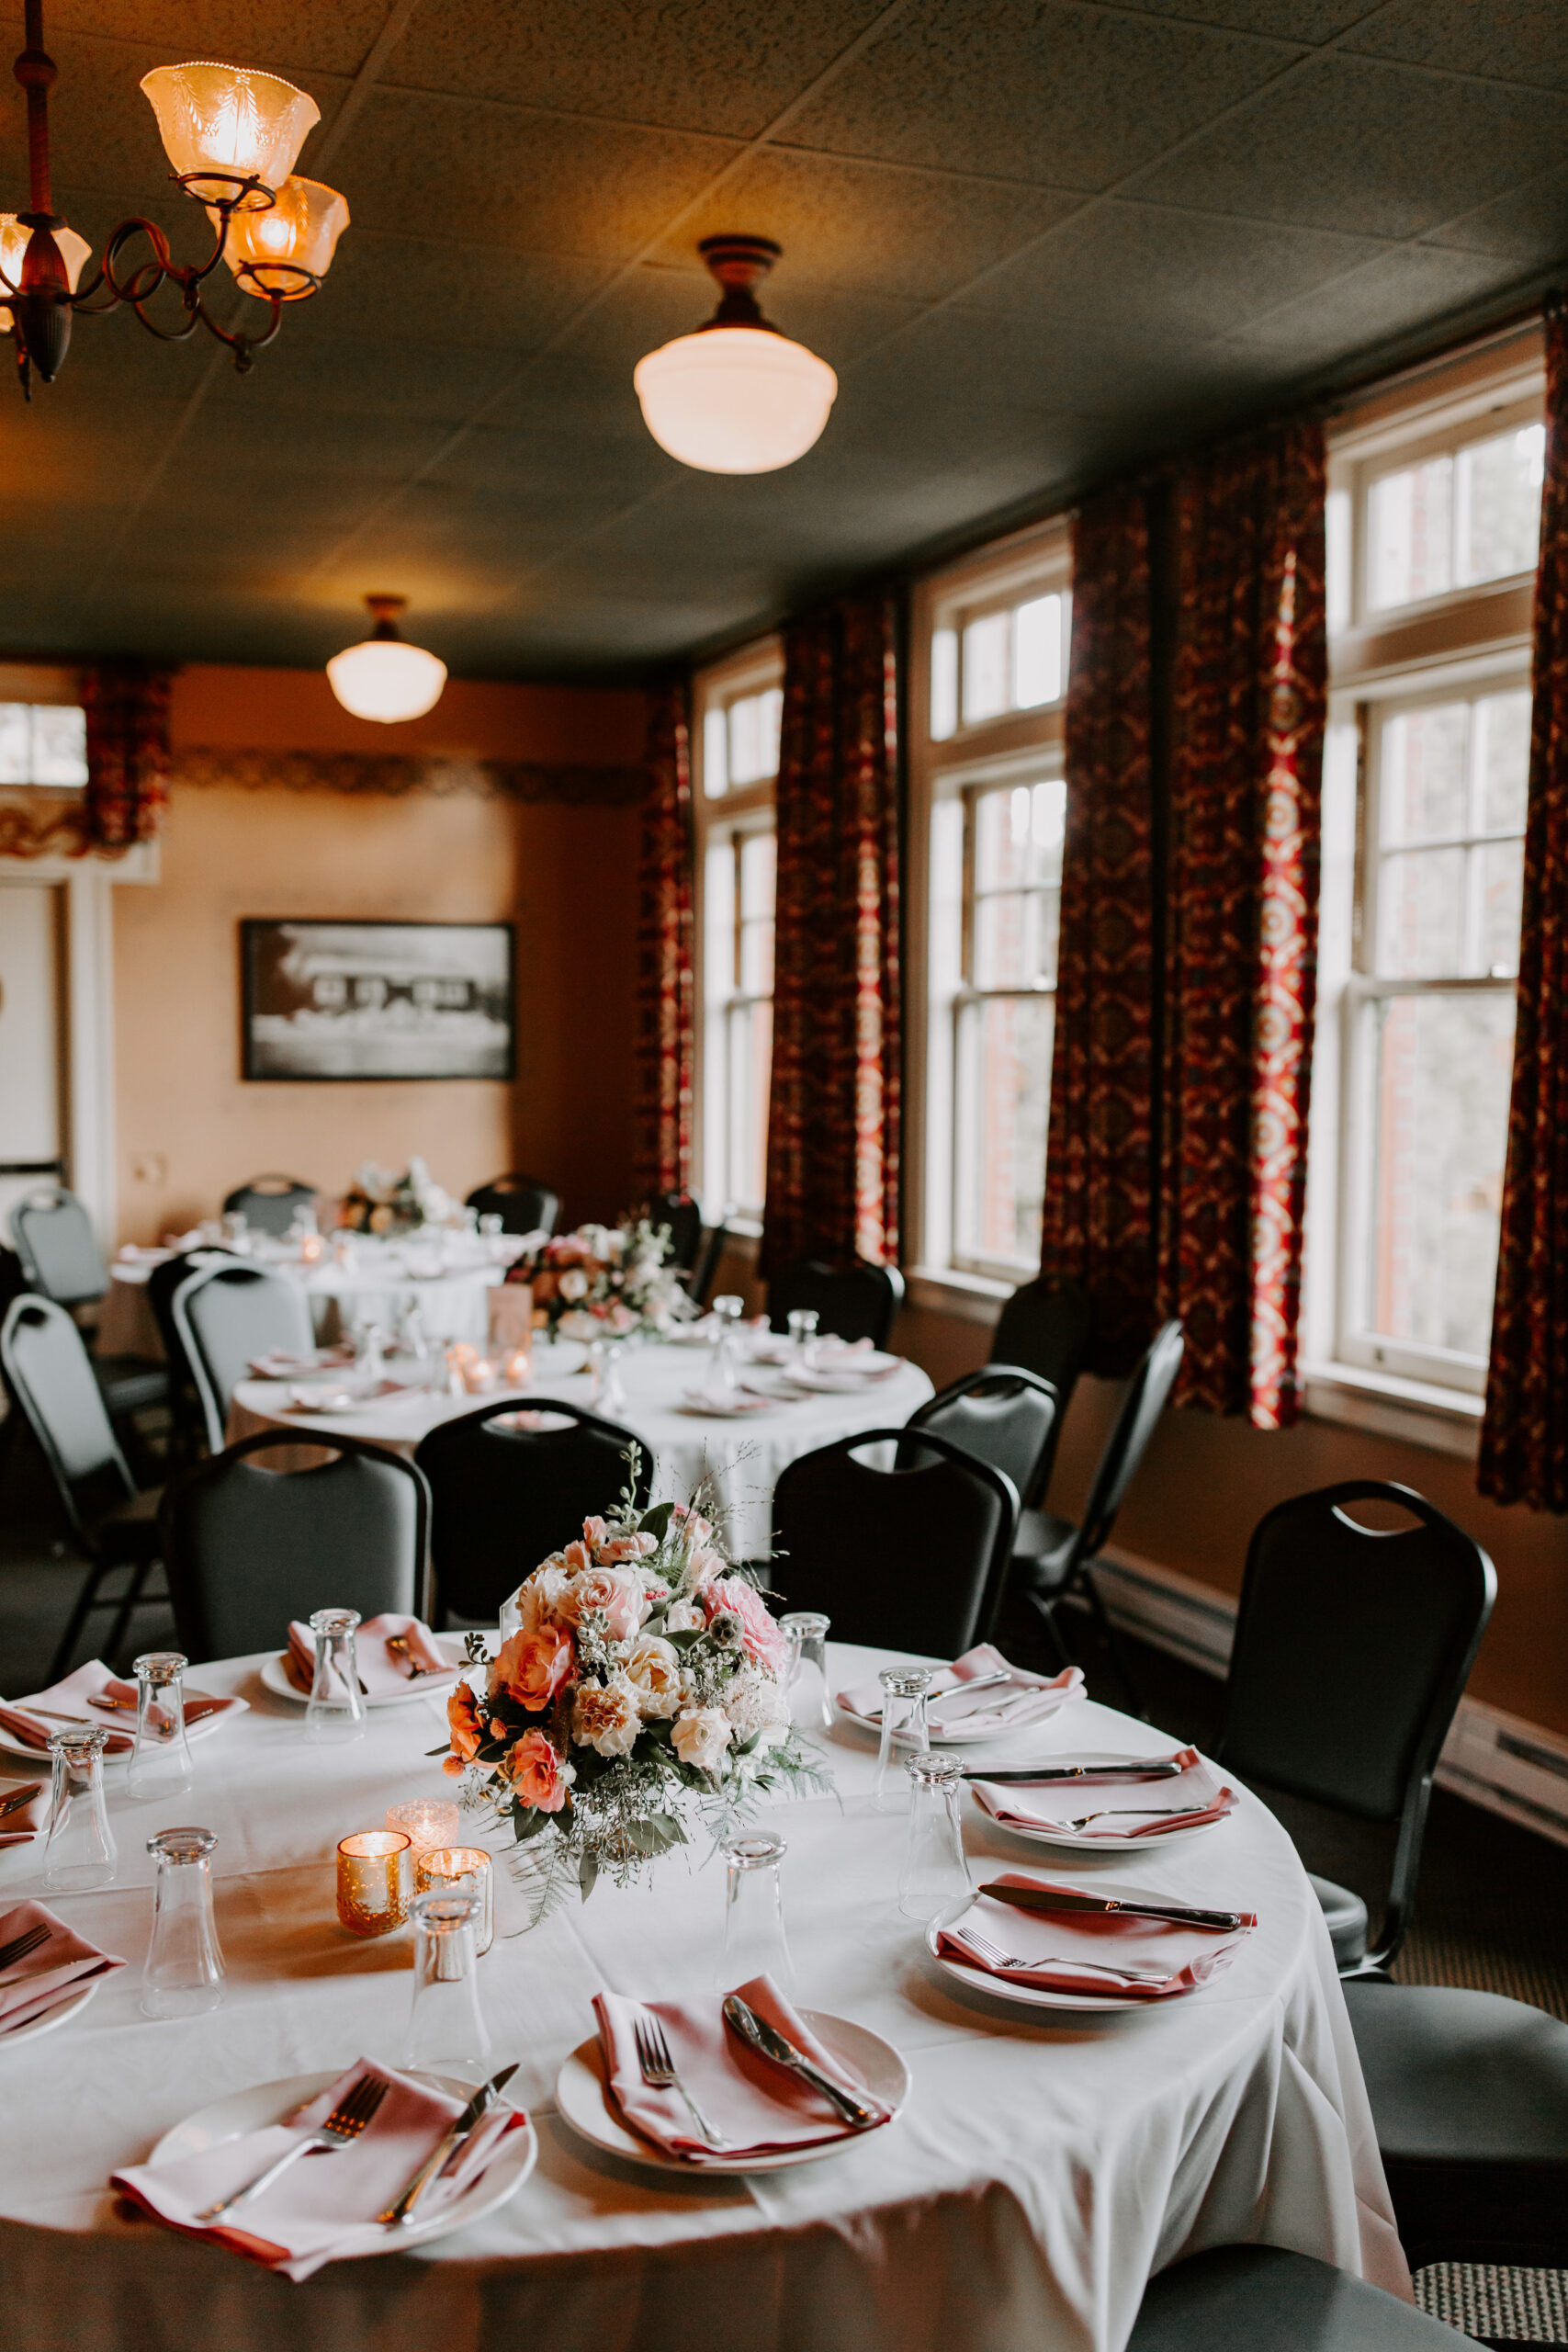 Rustic Bloom Photography |  McMenamins Grand Lodge | Reception Table Inspiration